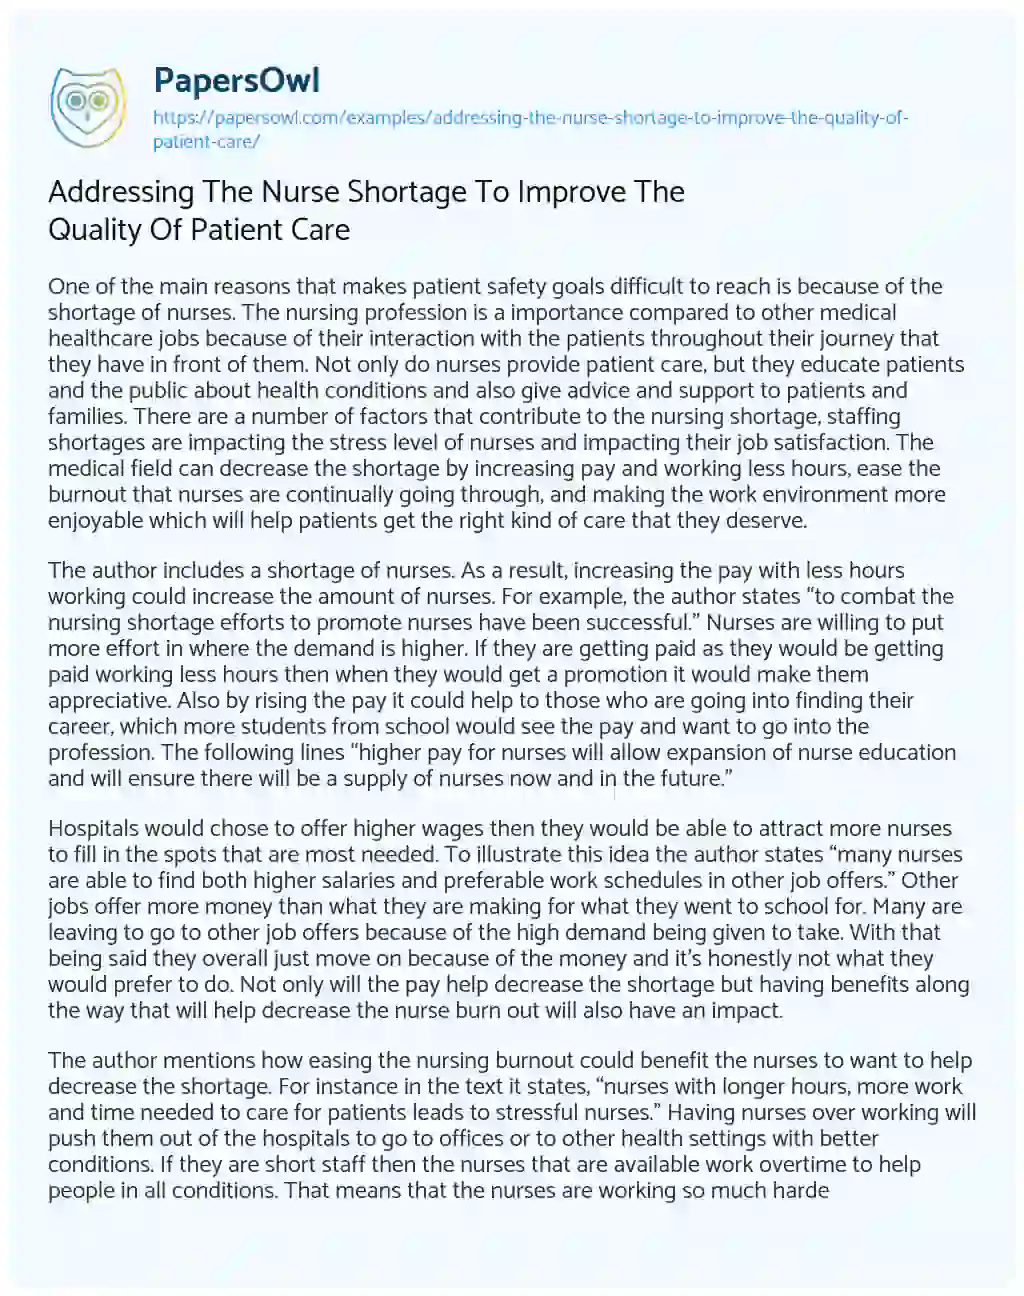 Essay on Addressing the Nurse Shortage to Improve the Quality of Patient Care